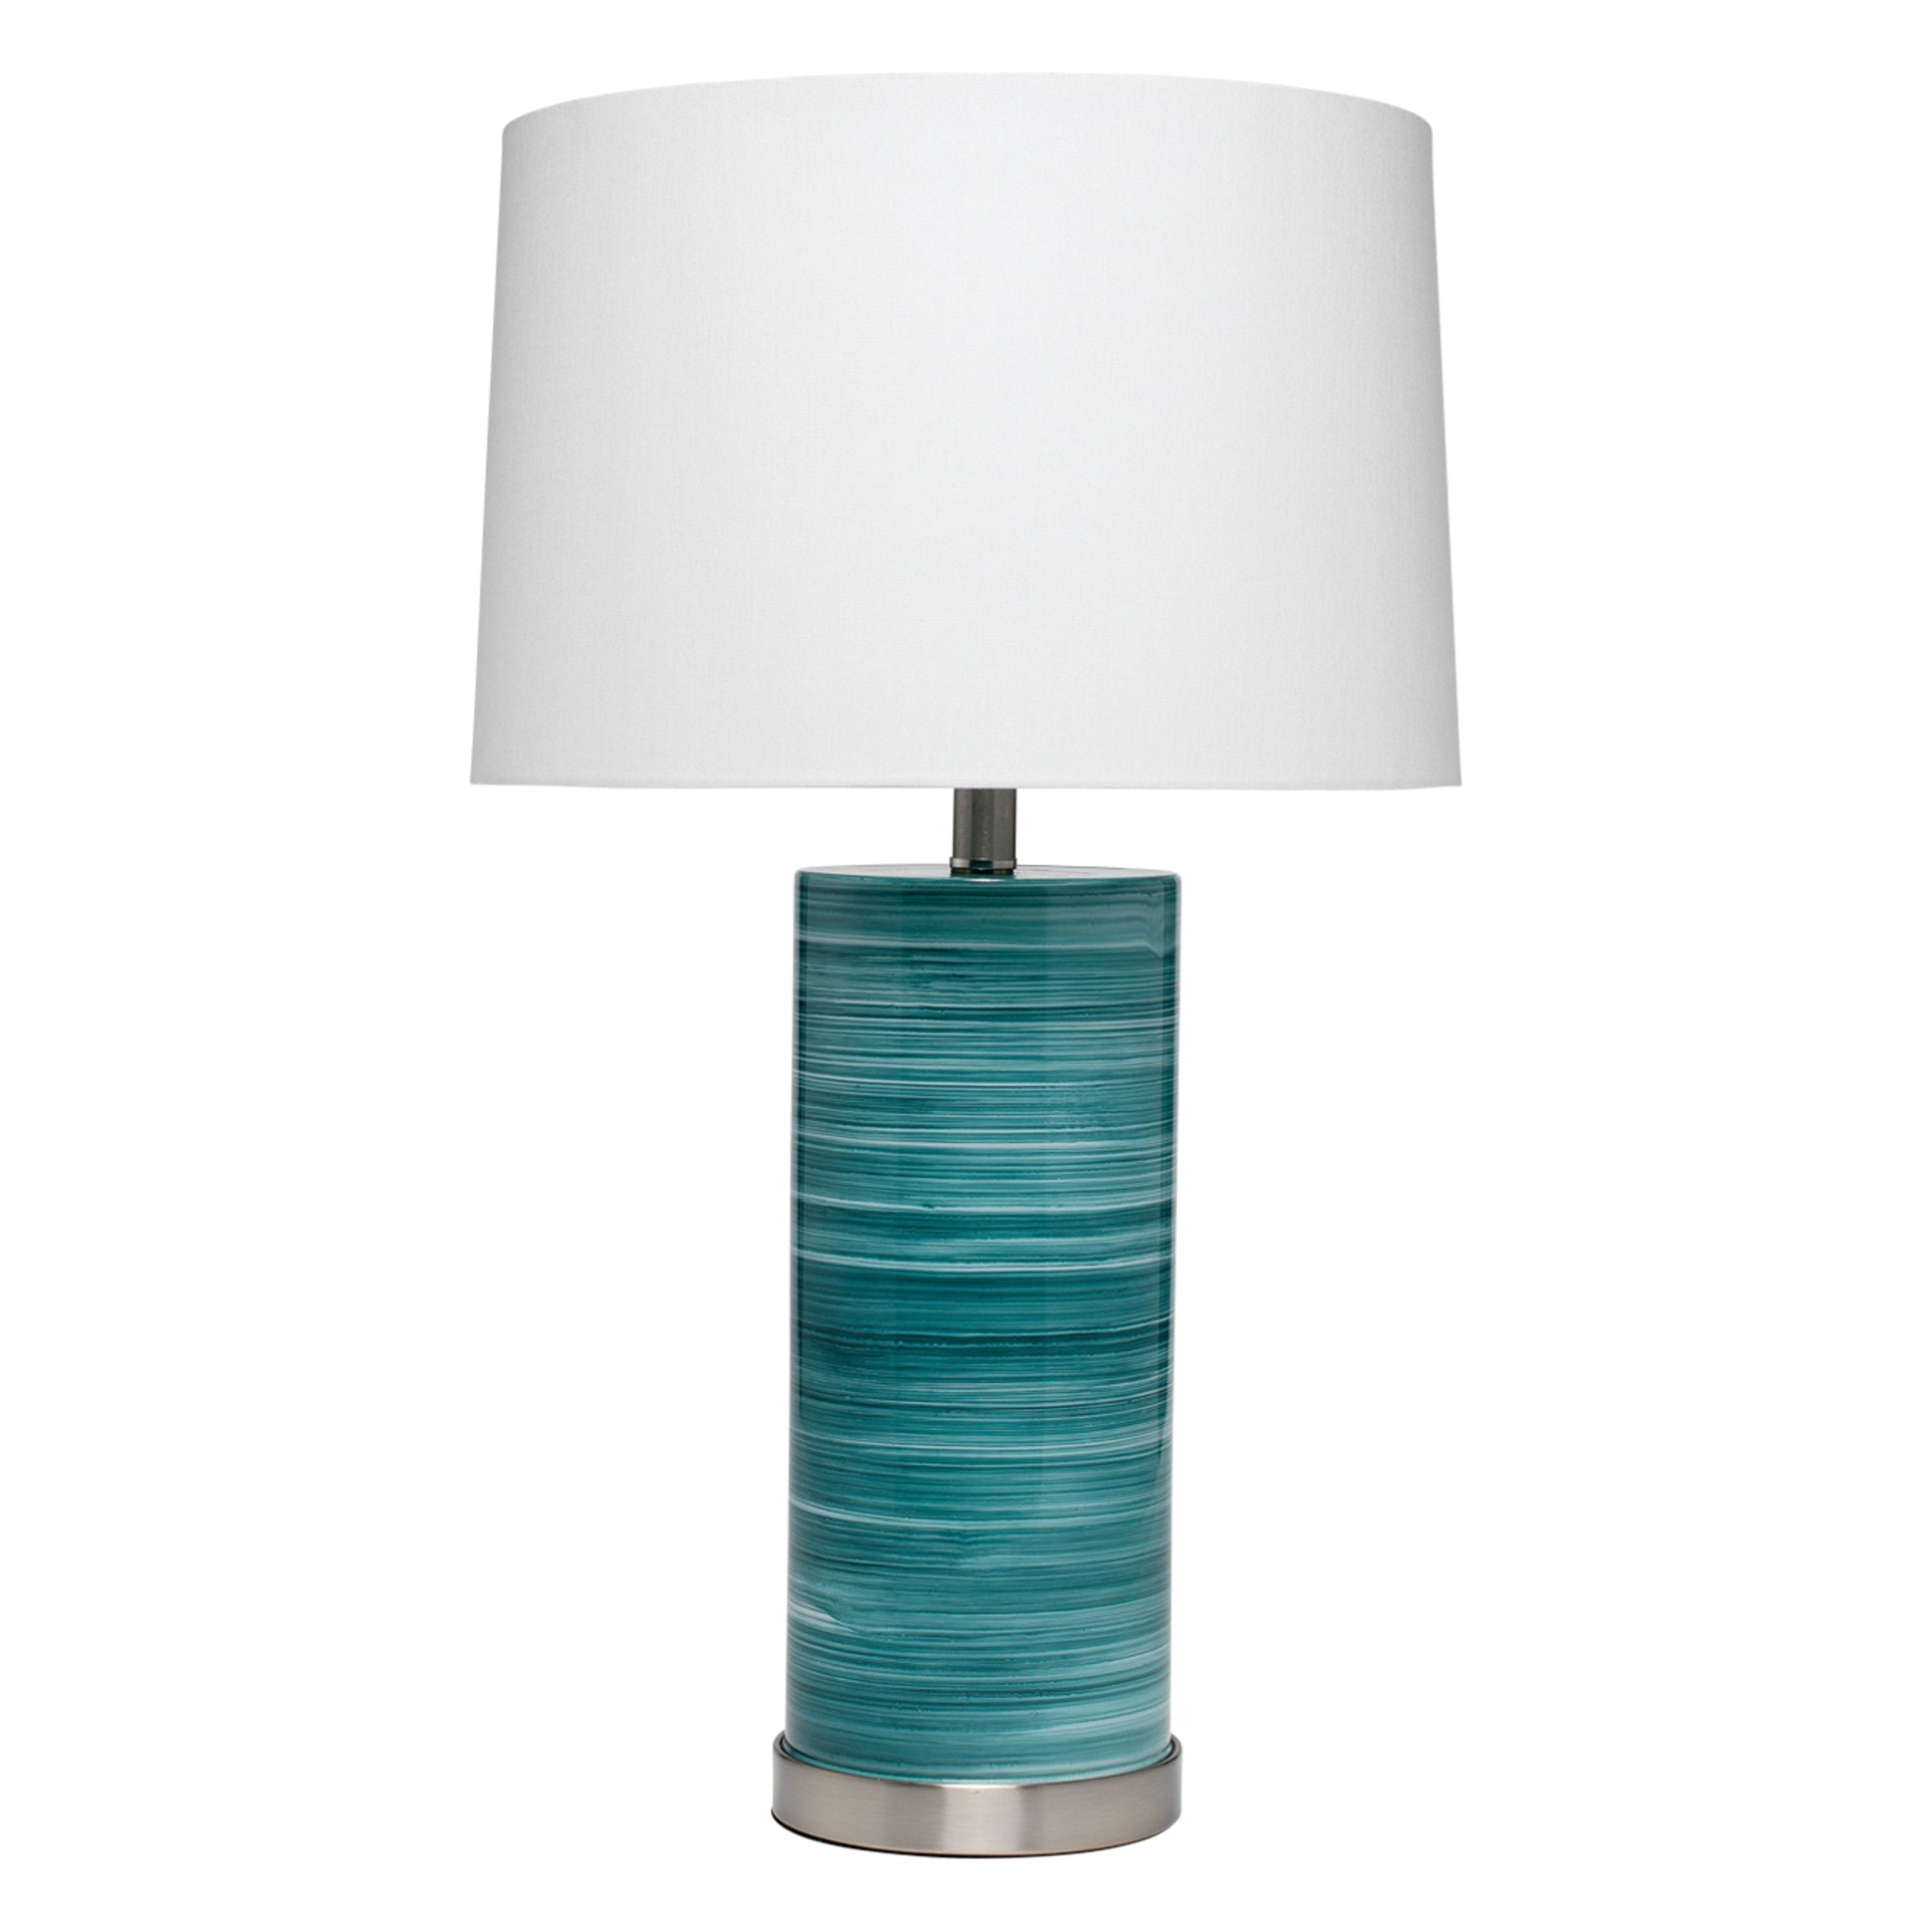 Jamie Young Company - LSCASEYBL - Casey Table Lamp -  - Turquoise